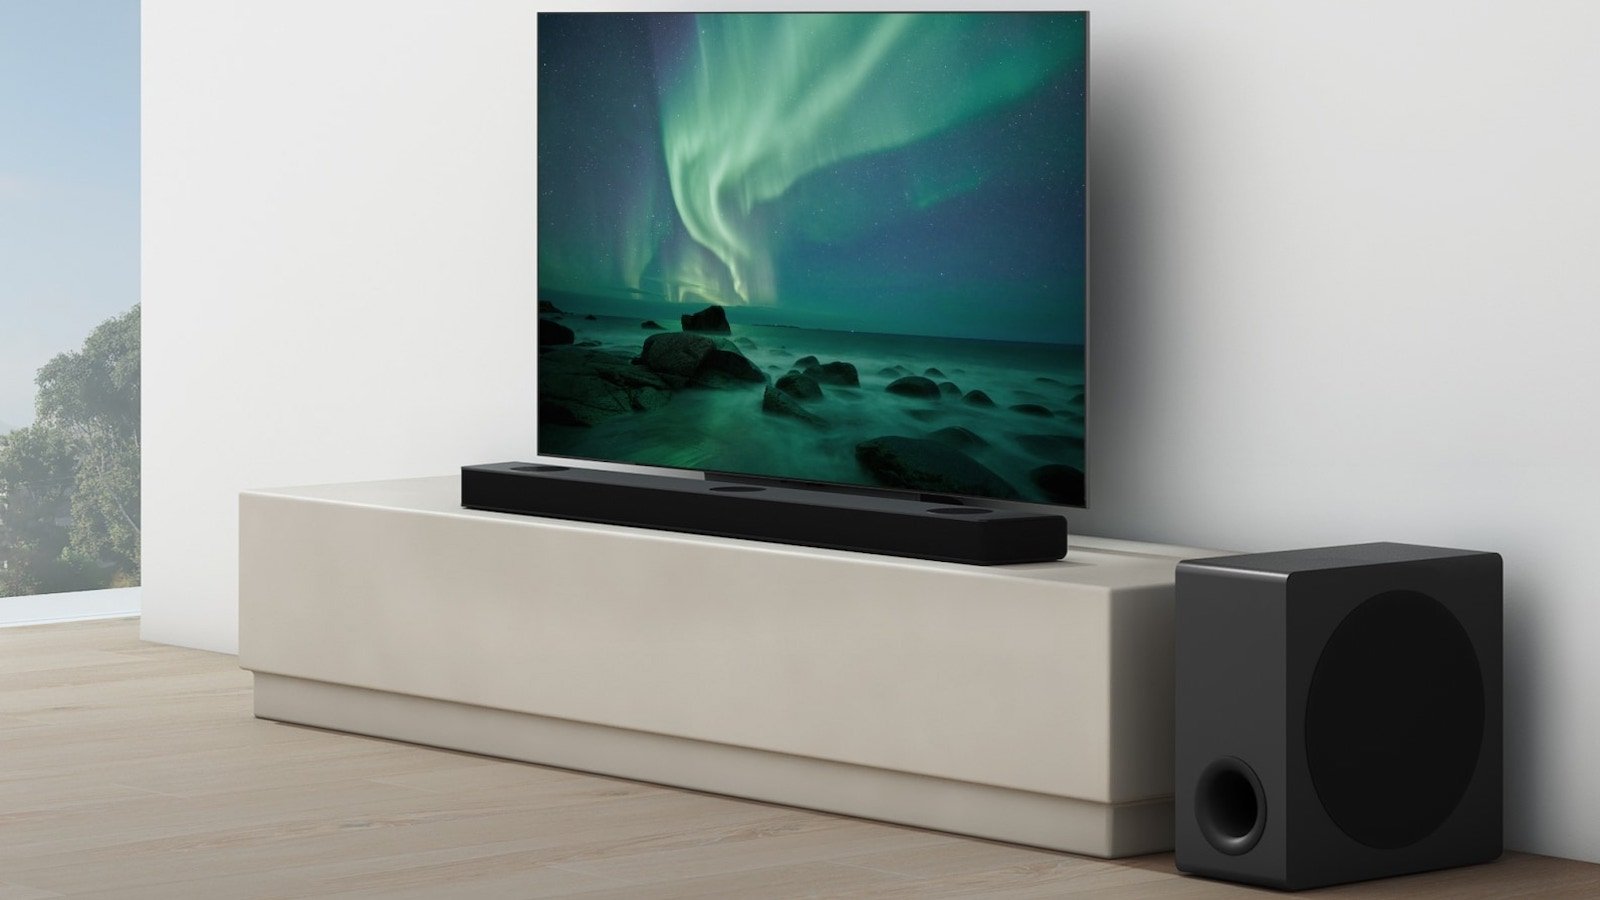 LG S95QR sound bar in the living room